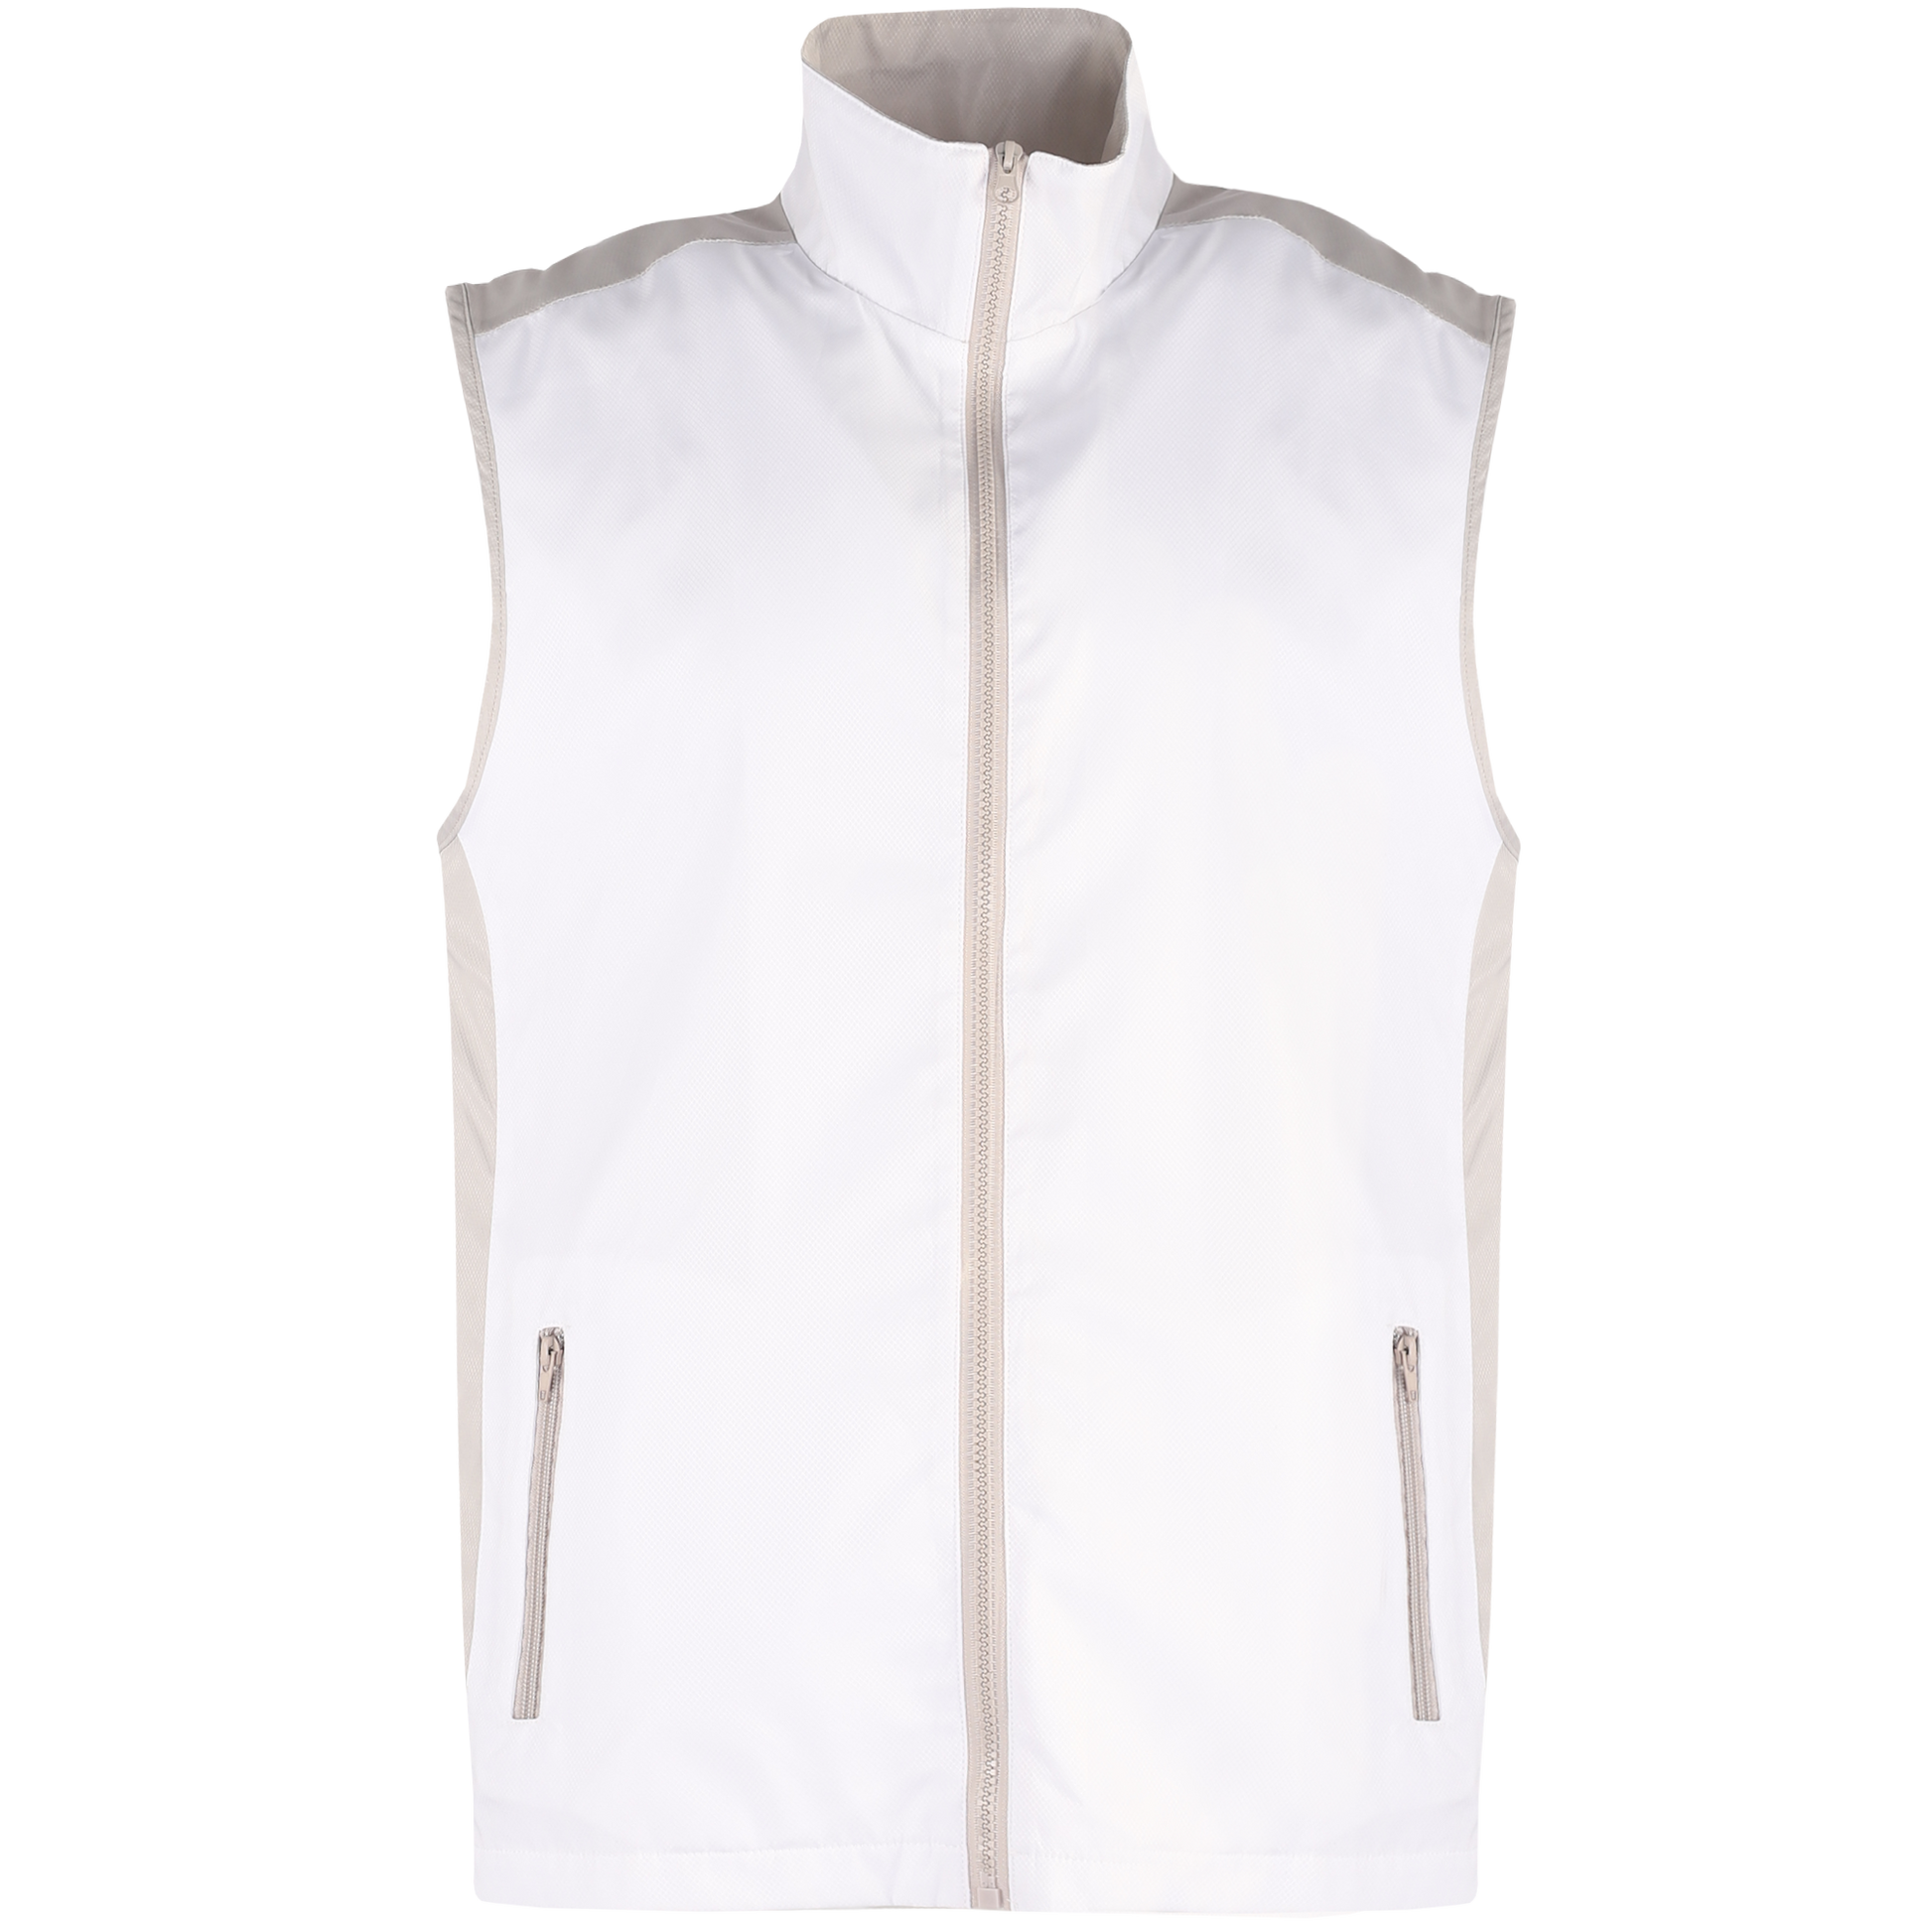 Lightweight Gilet in White - Uniform by CYC Corporate Label Singapore